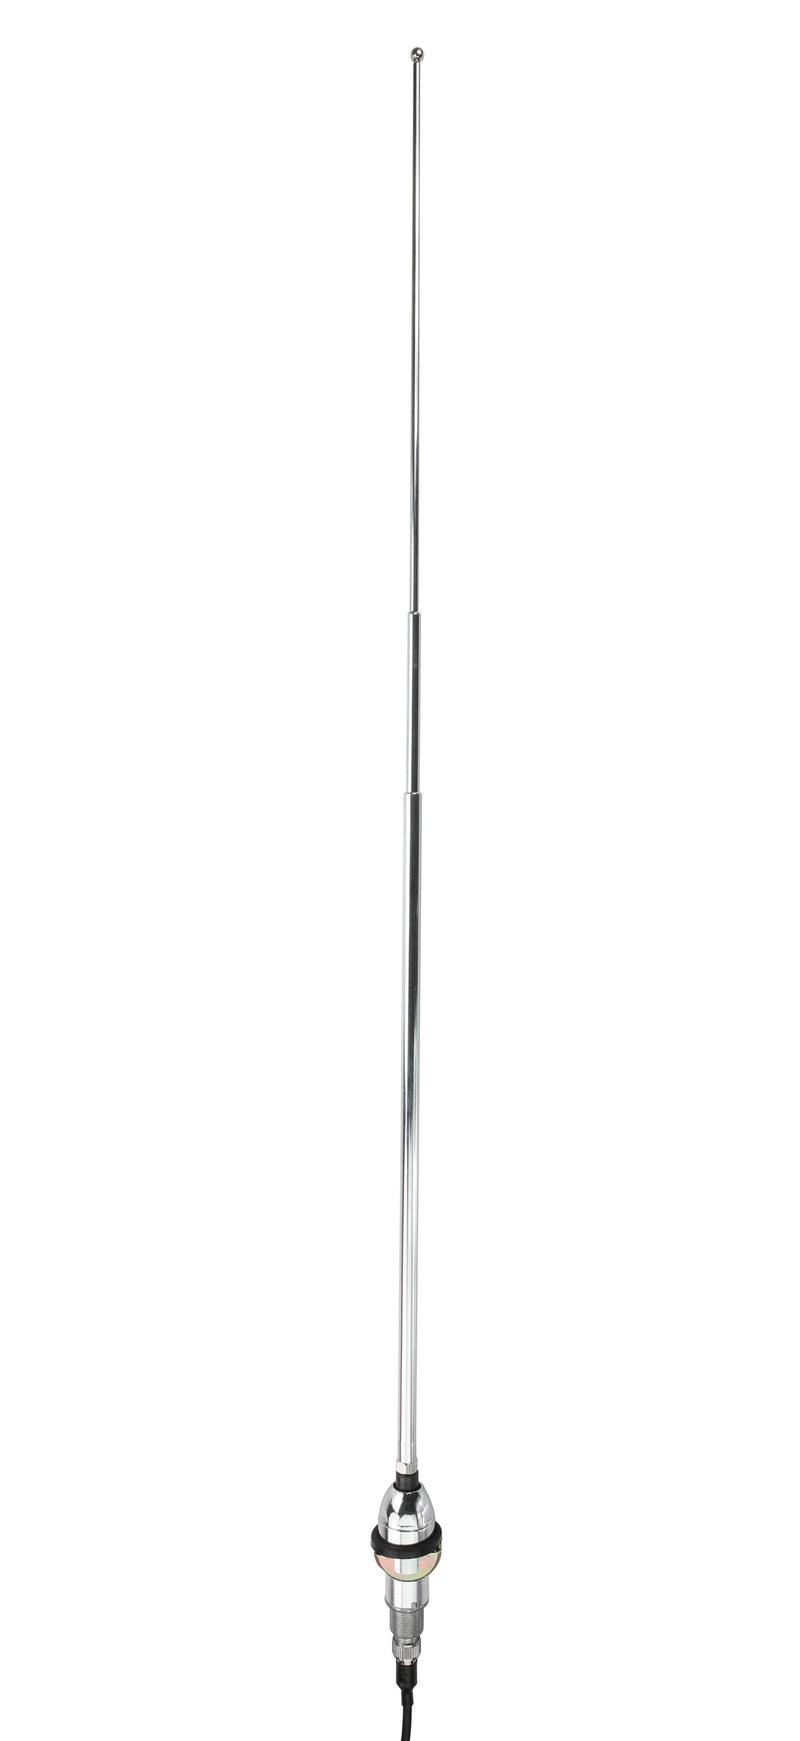 1964-68 Chevrolet Chevelle Replacement Antenna